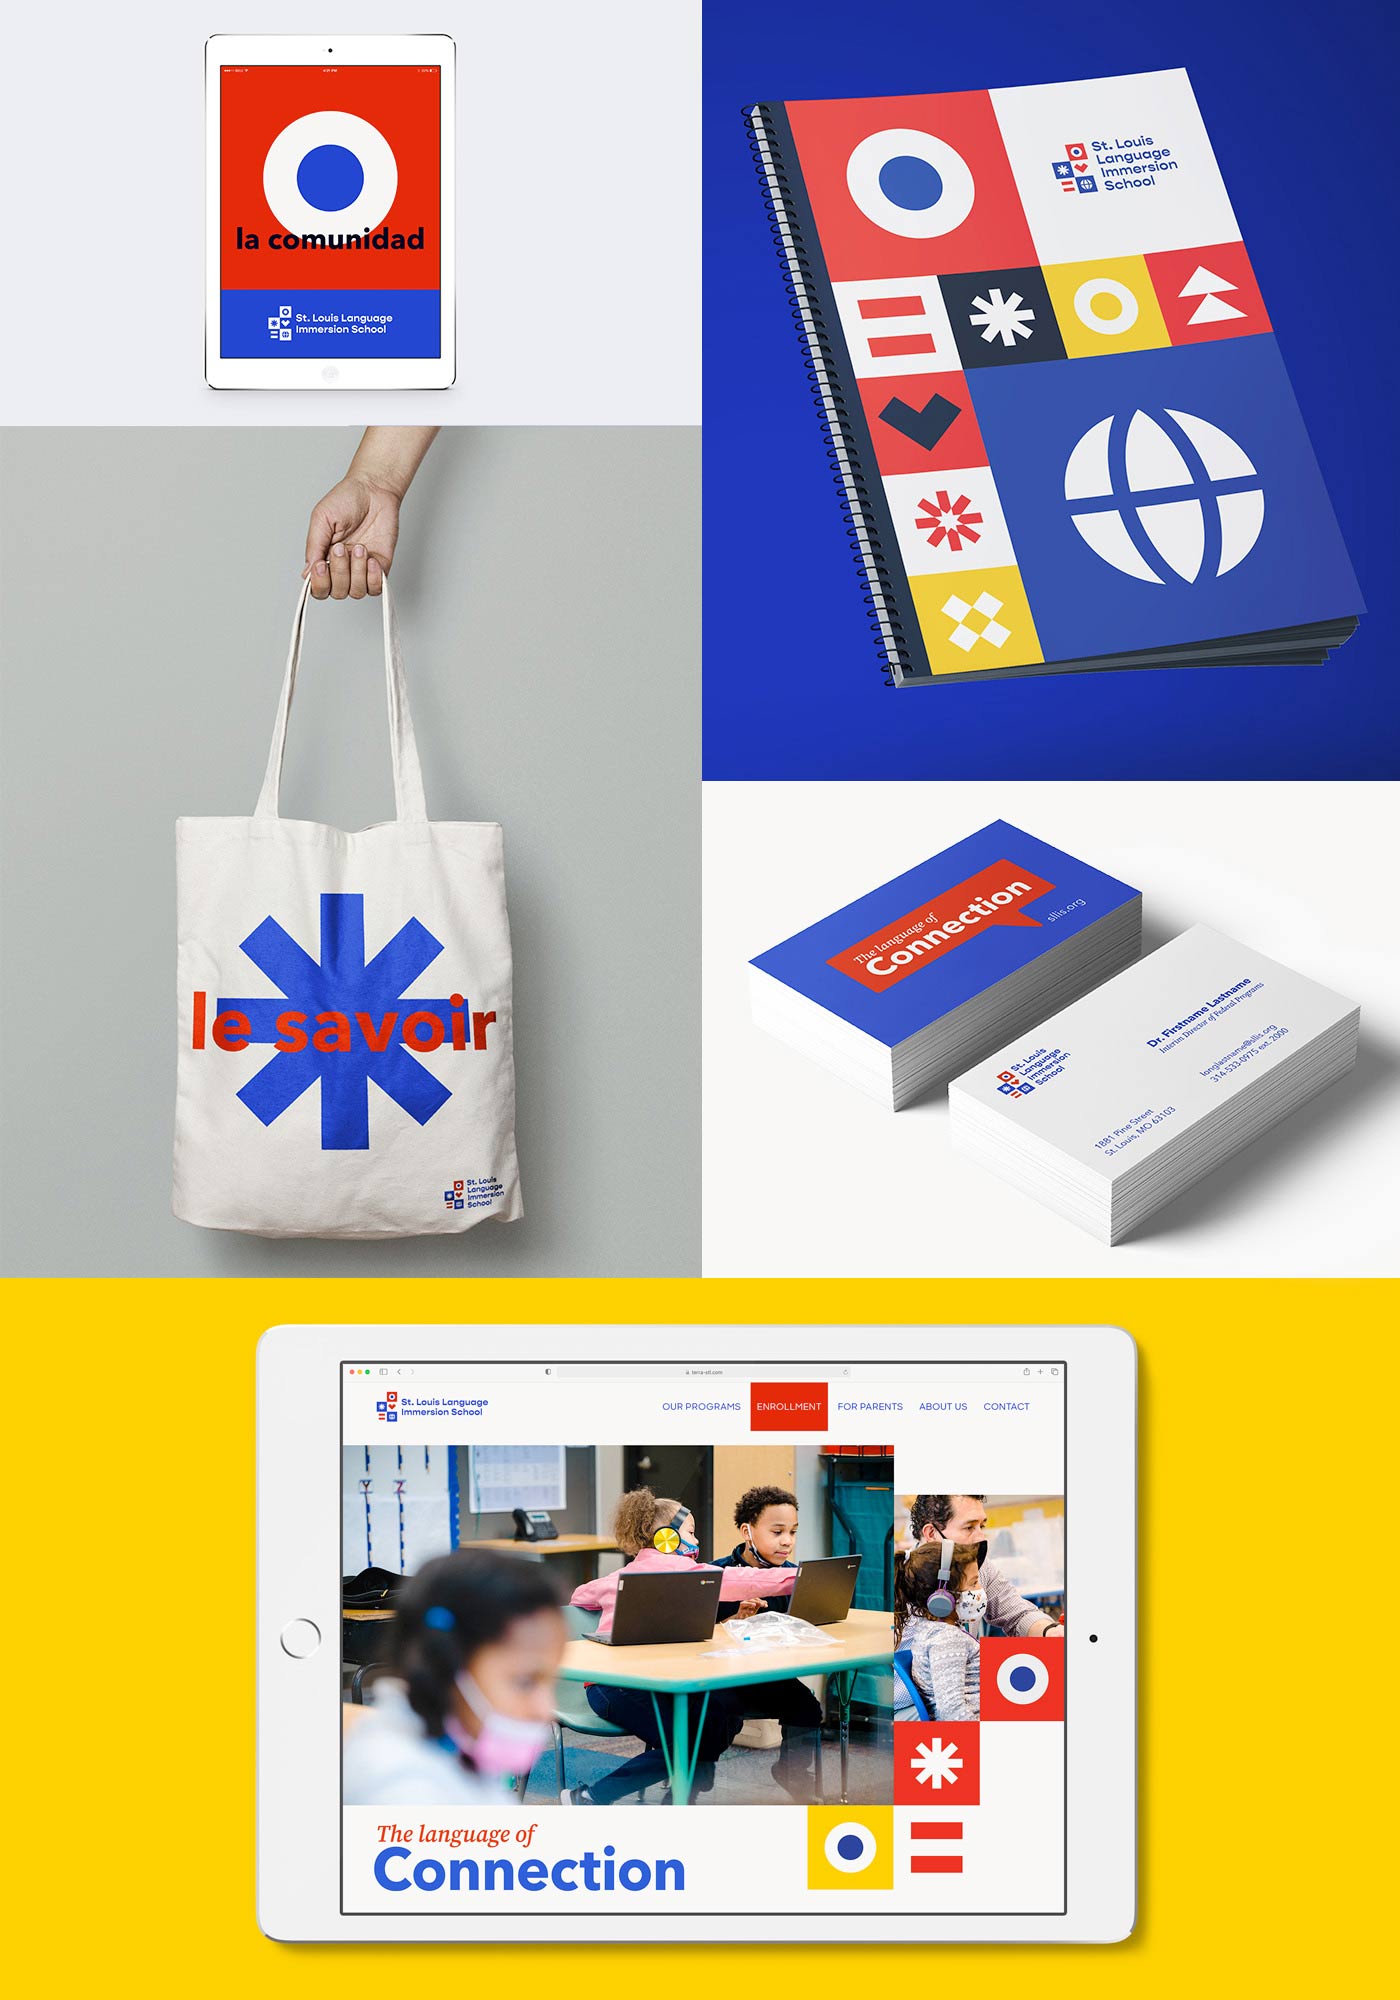 St. Louis Language Immersion School's new branding shown on business cards, a tote bag, website and more